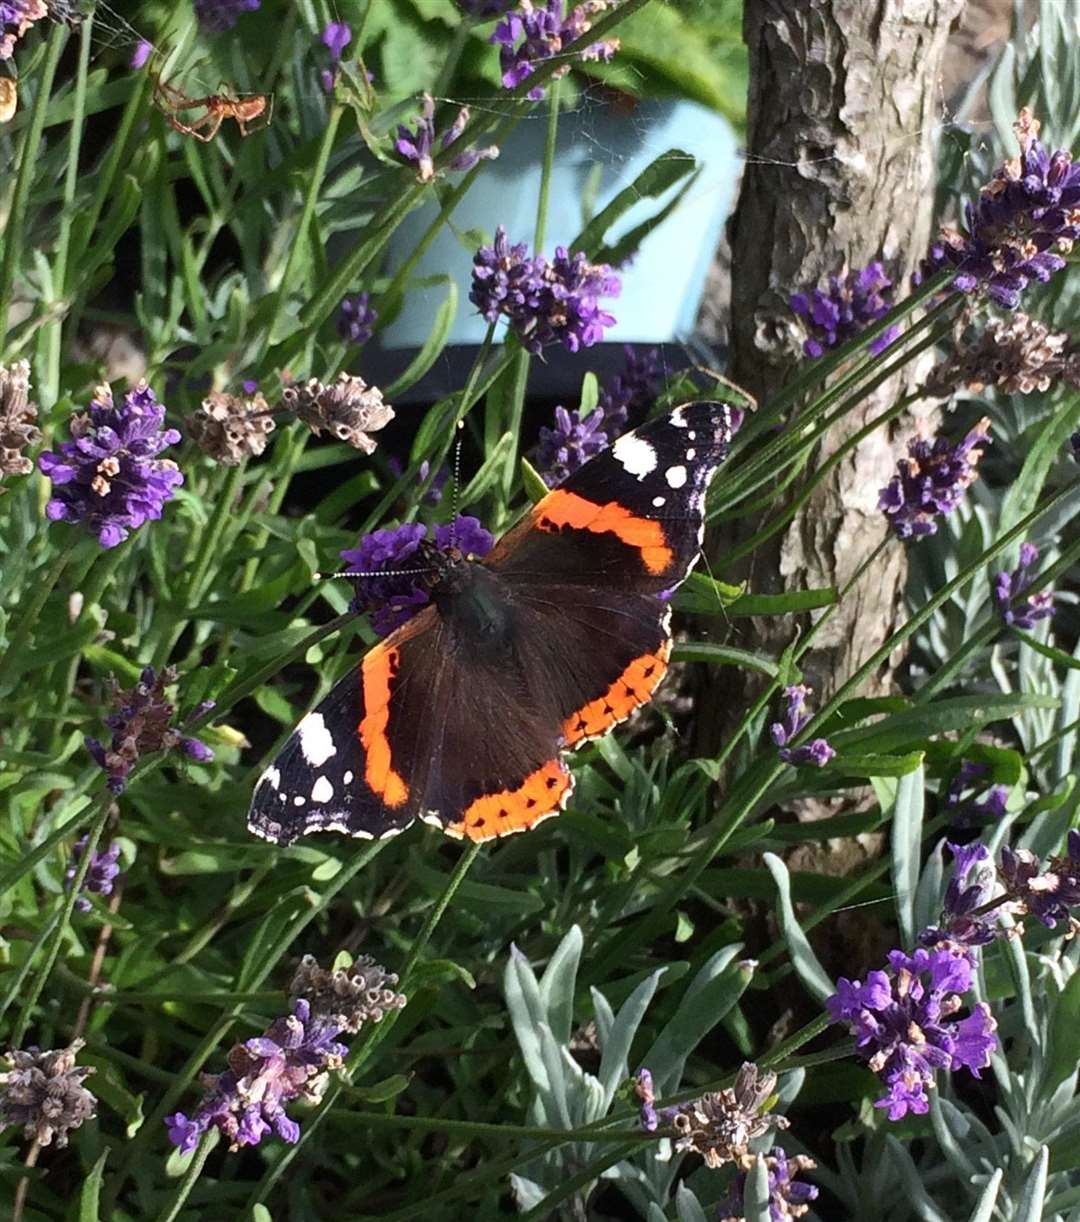 A butterfly enjoying the lavender. One of Donna Shearer's entries in the Gardens of 2020 class.